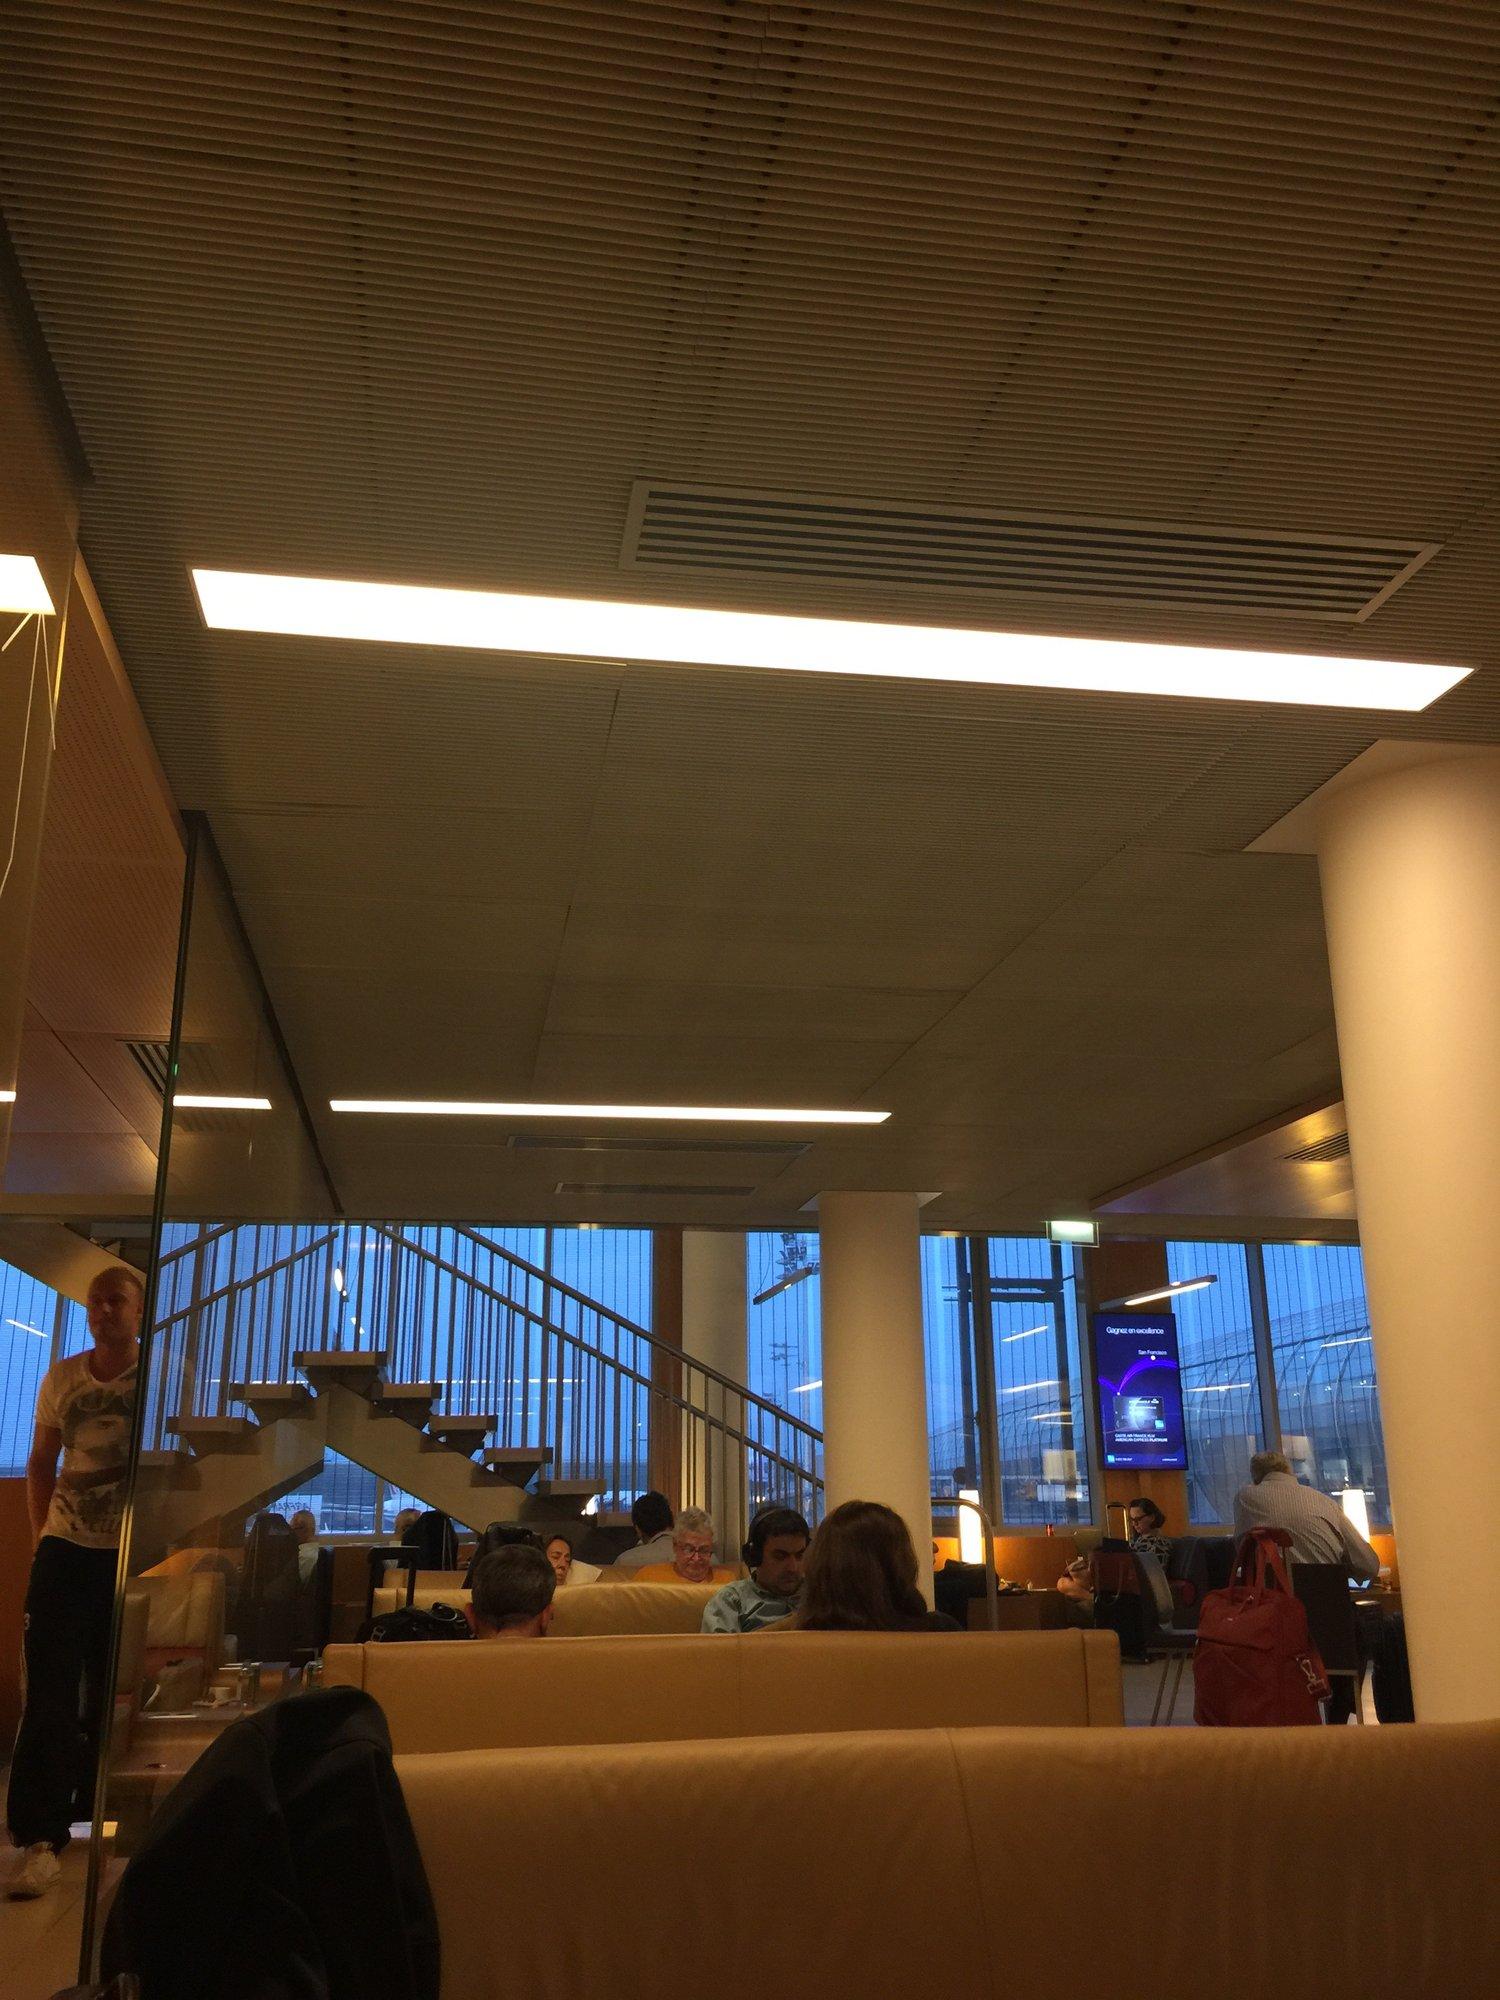 Air France Lounge (Concourse K) image 10 of 35